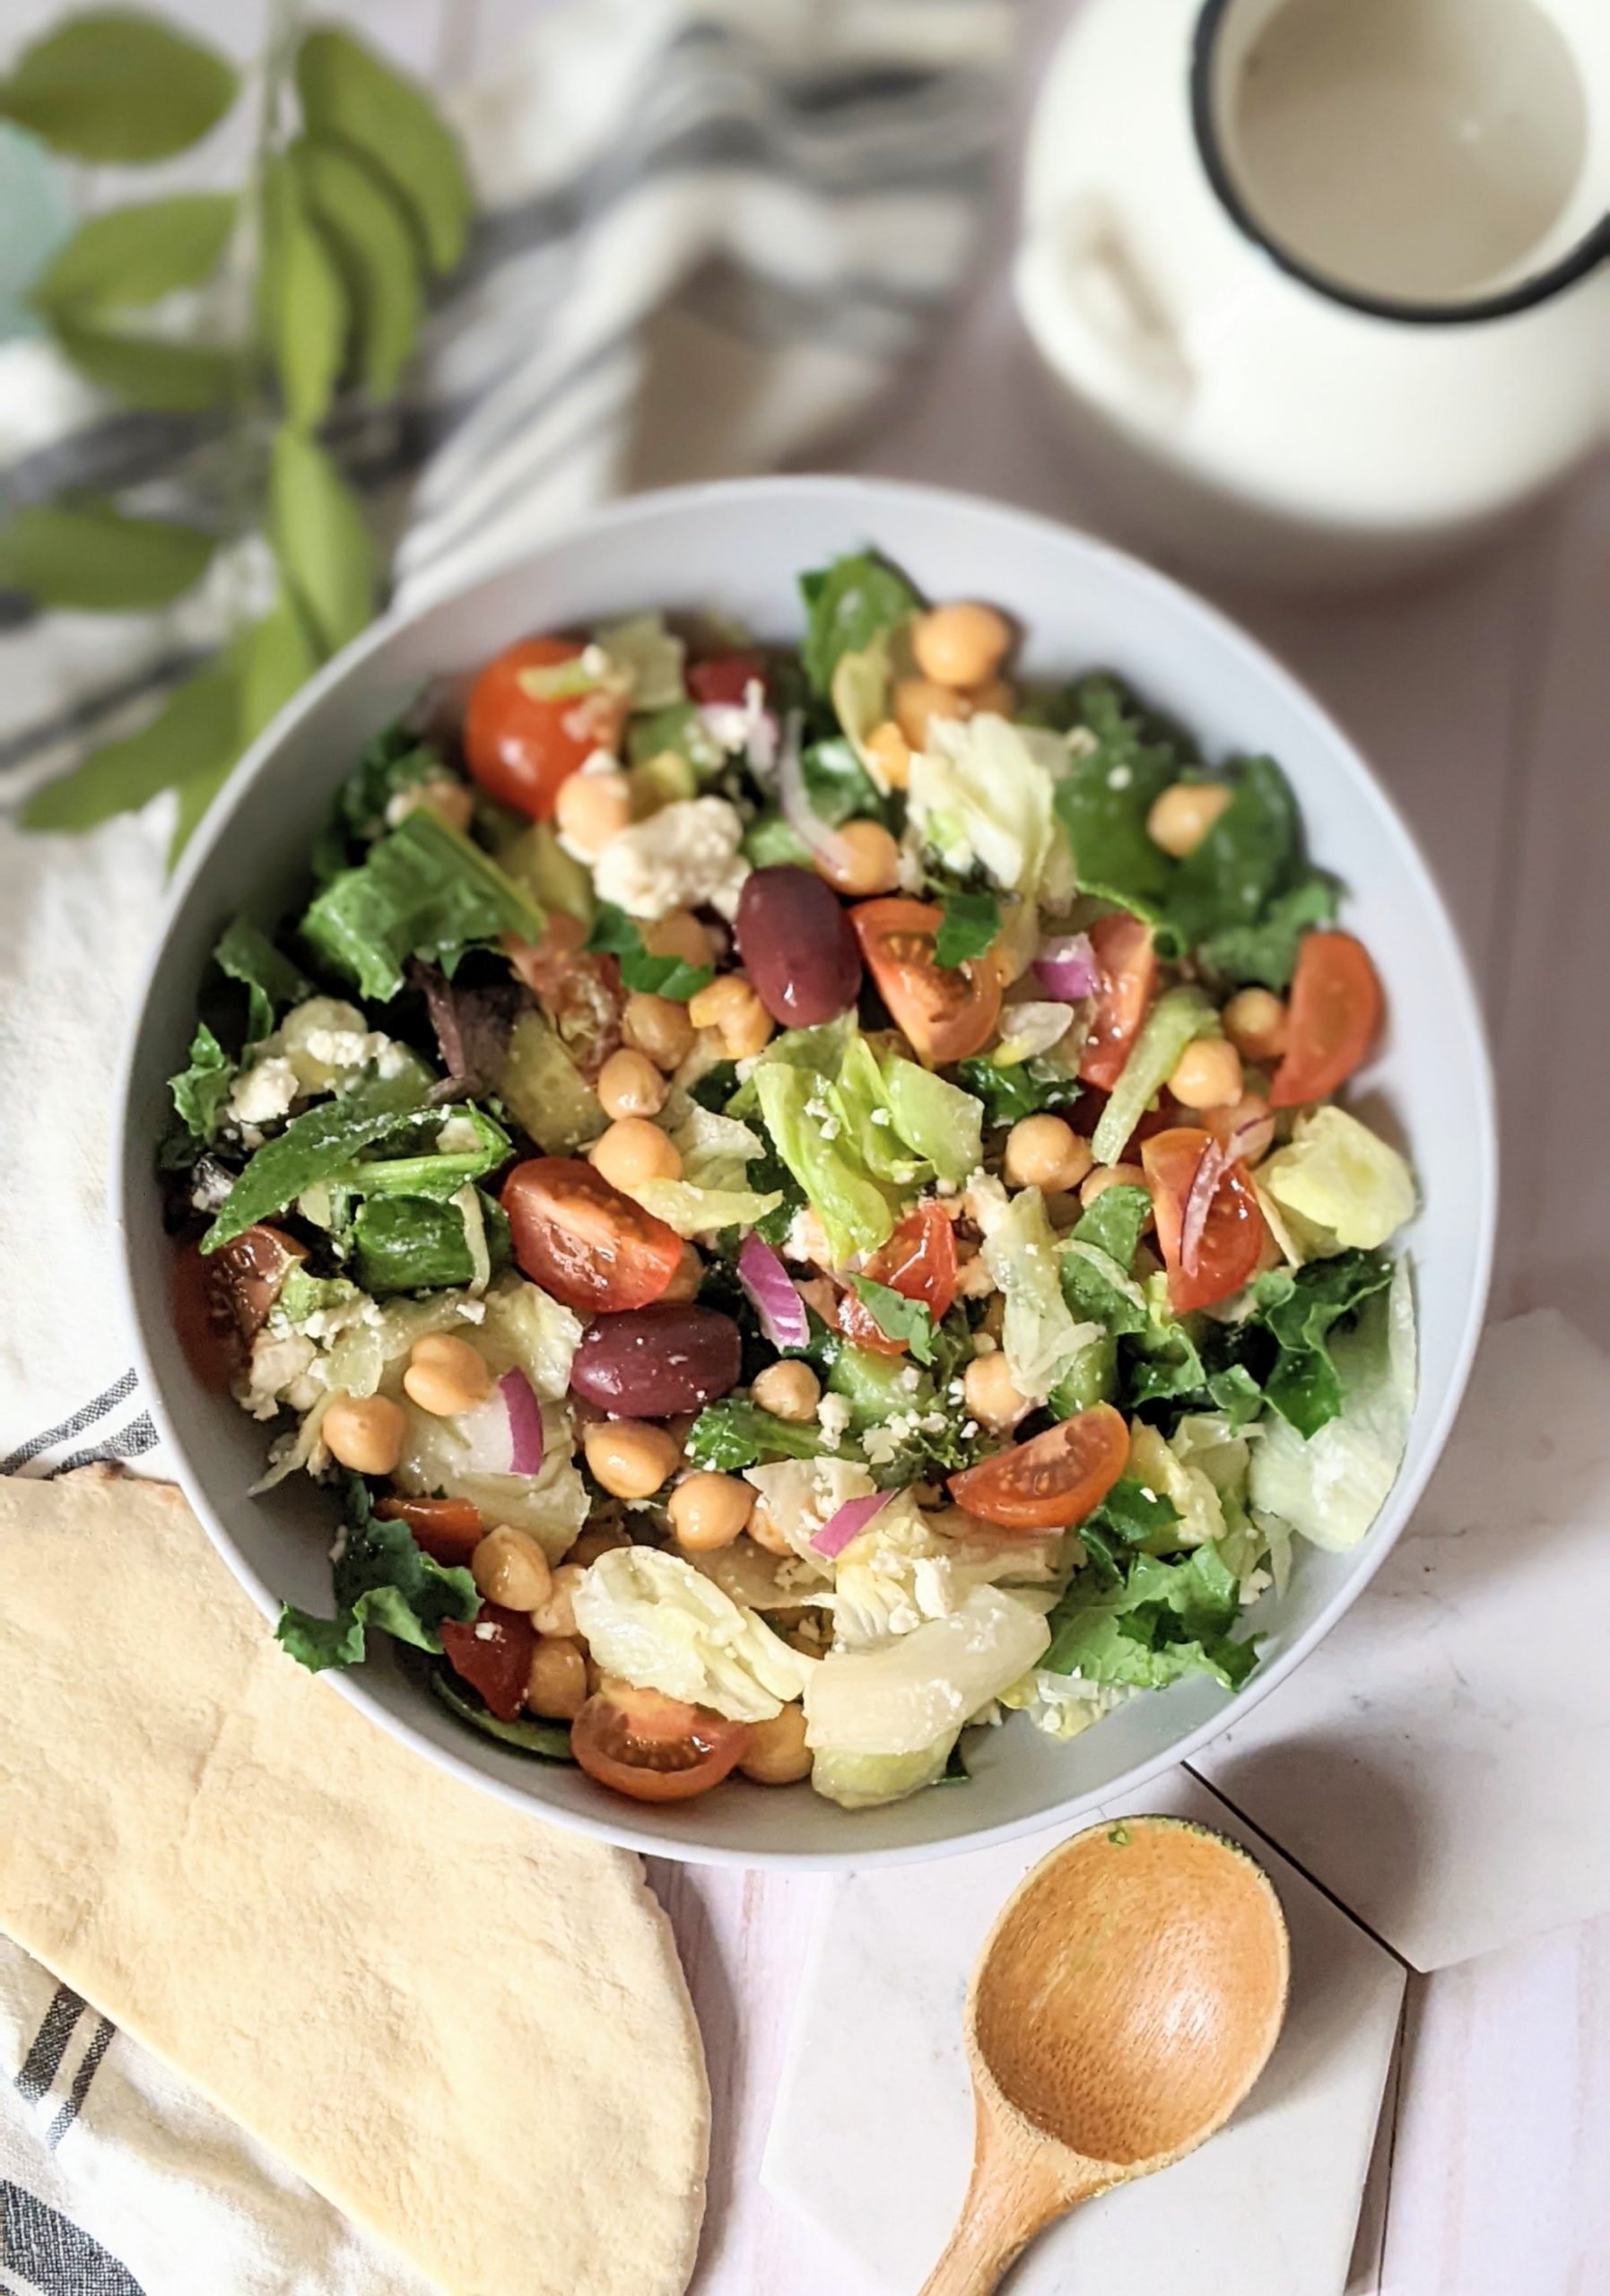 chopped chickpea green salad recipe vegan vegetarian gluten free meatless chopped greek salad with chickpeas recipe high protein vegan salads for veganuary